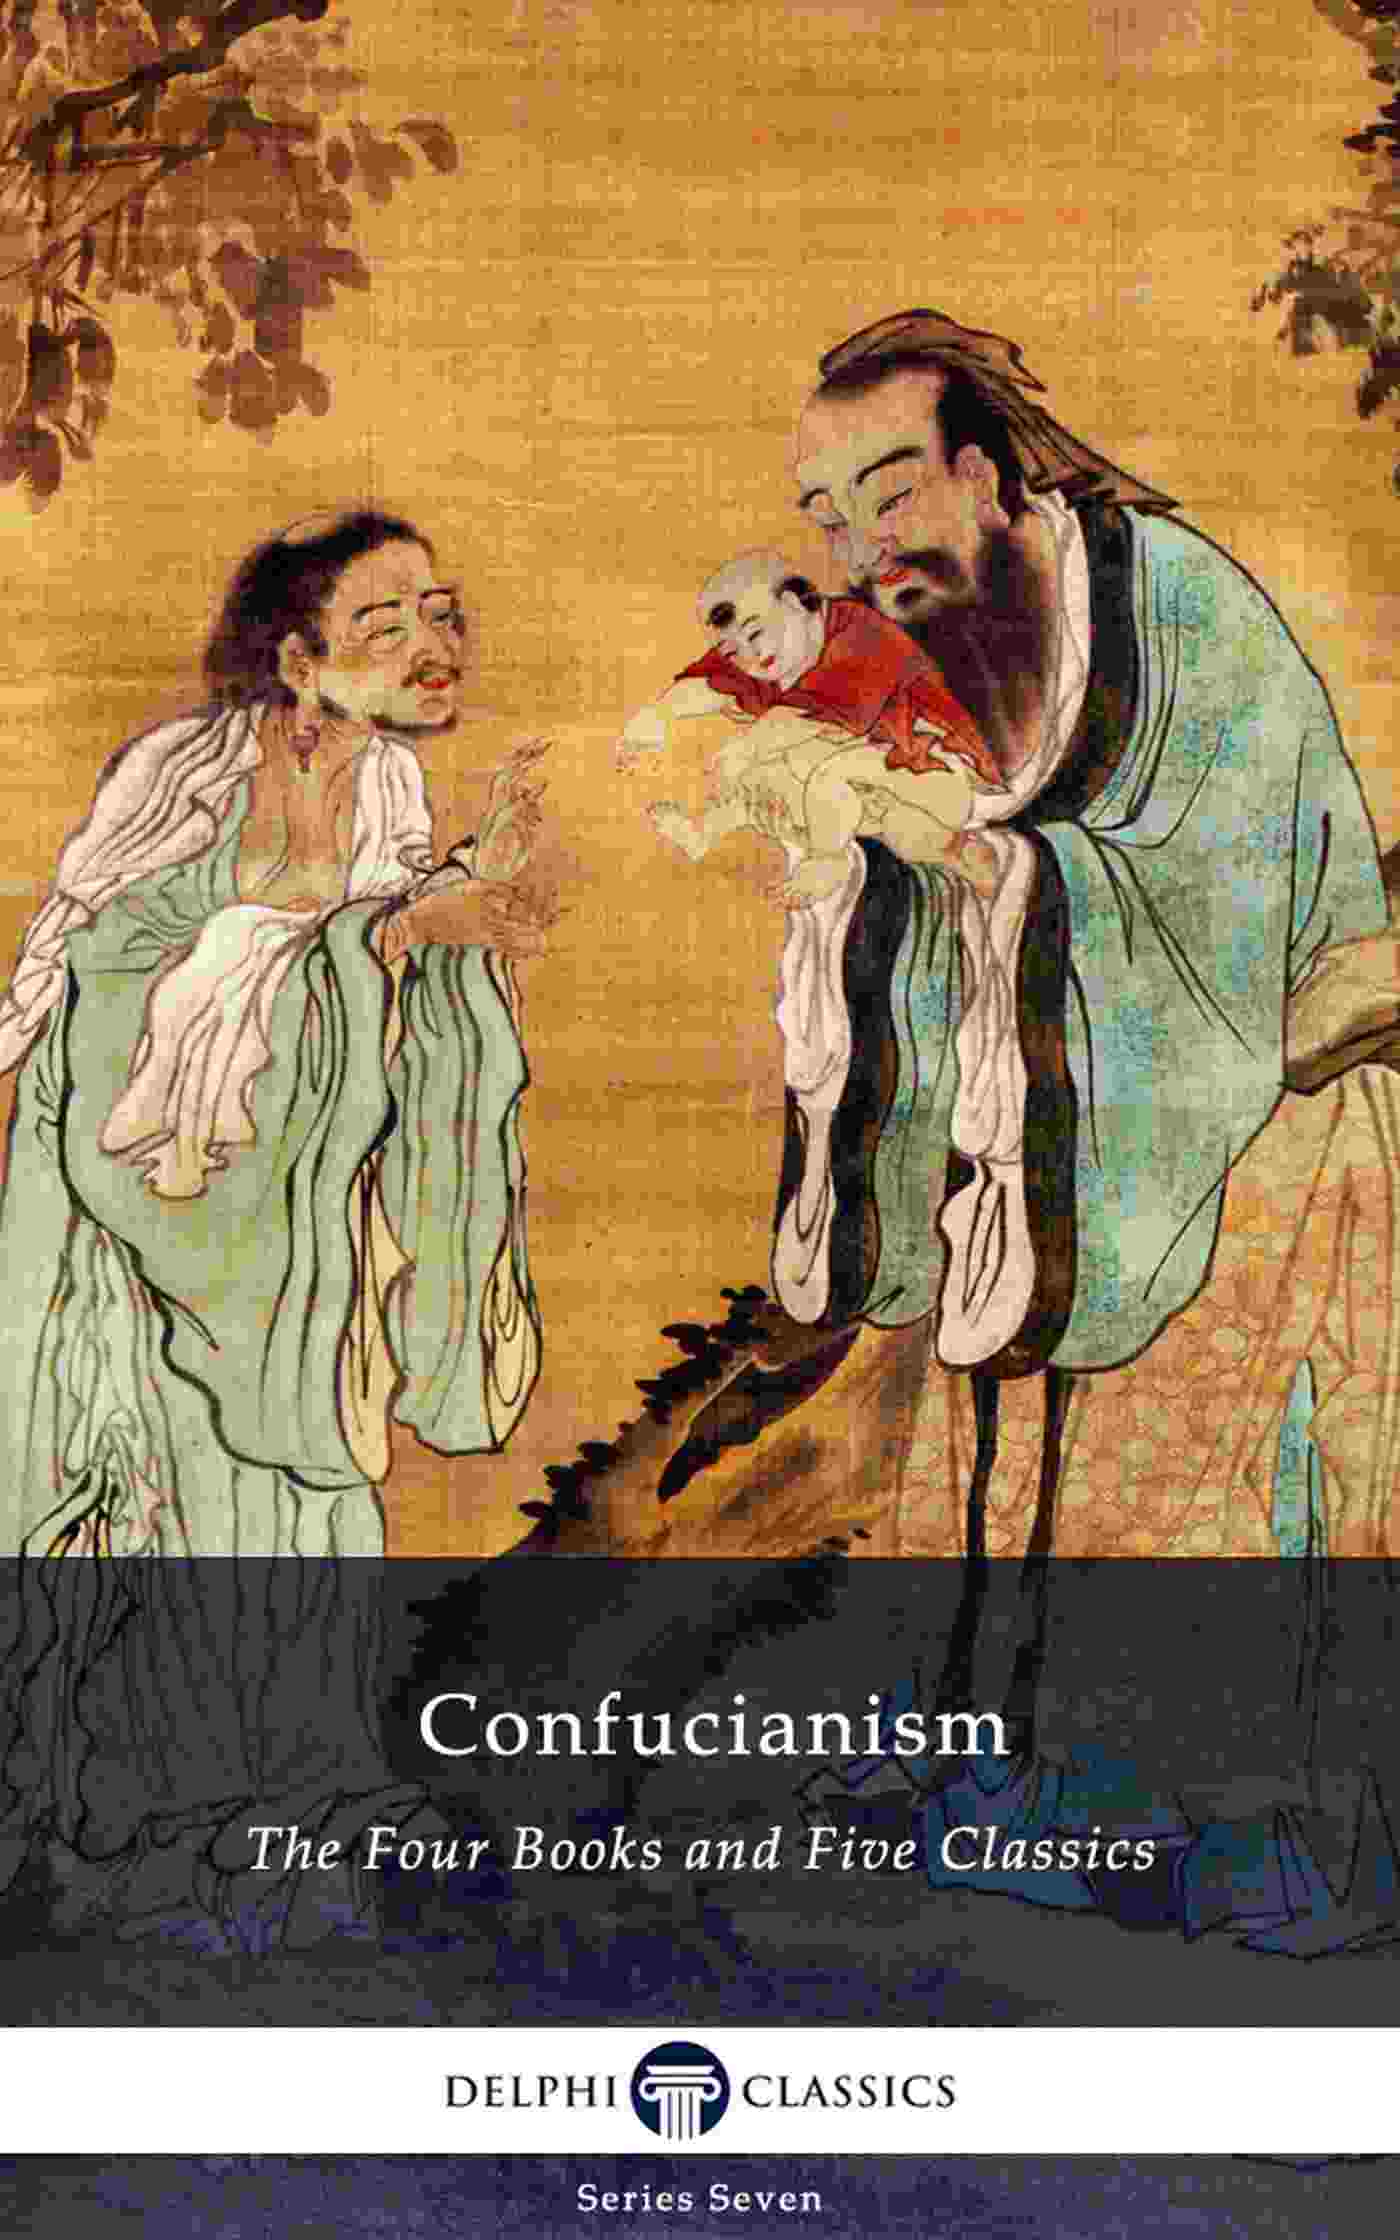 Confucianism: The Four Books and Five Classics